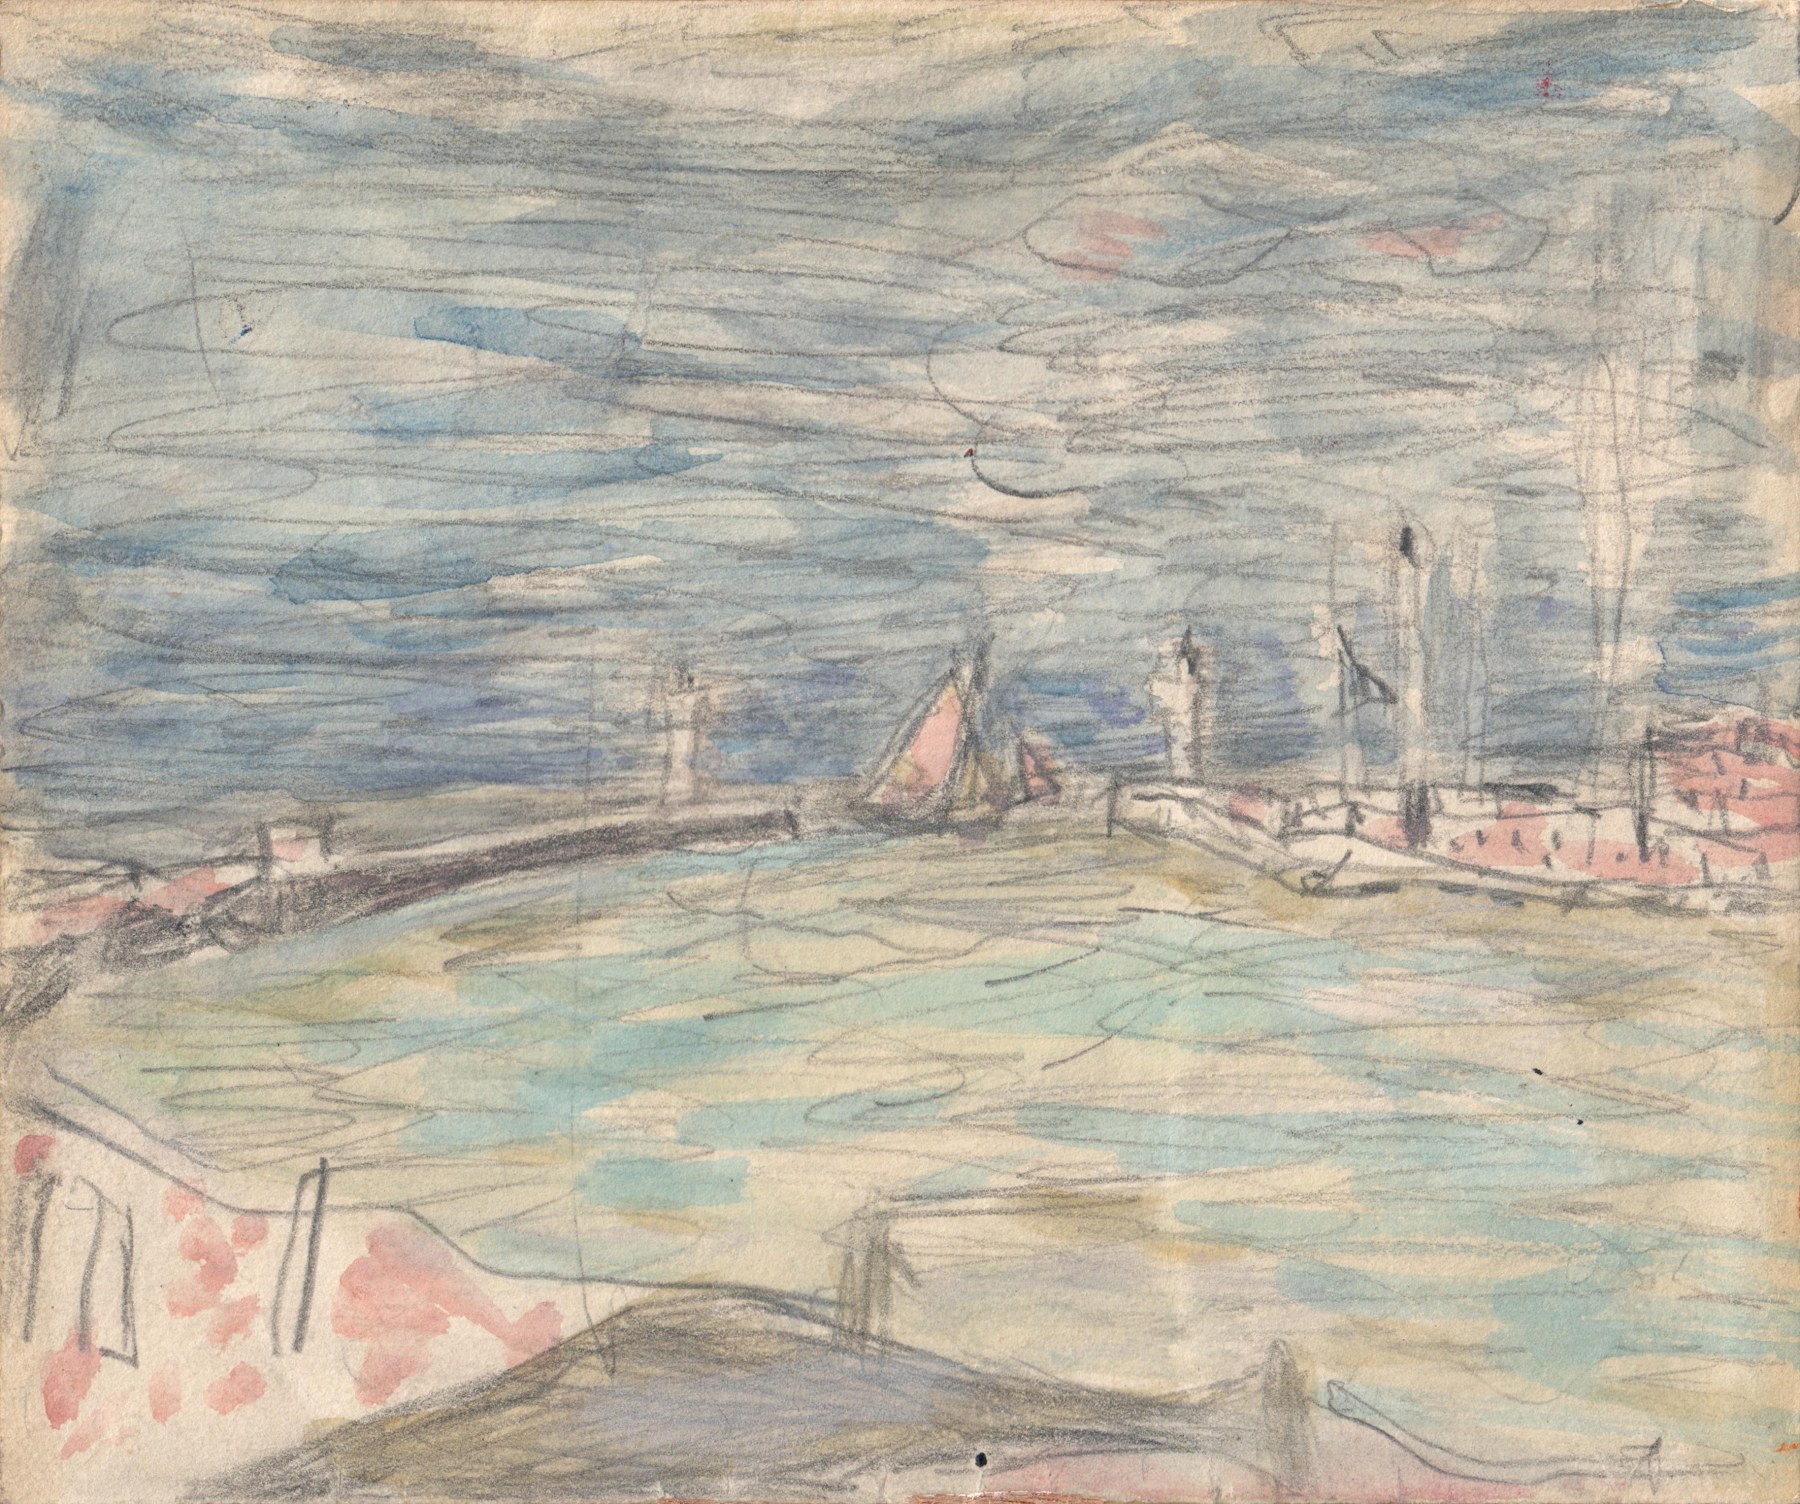 Pierre Bonnard, Sailboats at the Entrance to the Port, c. 1925,    Watercolor over pencil on paper 4 1&frasl;4 x 5 inches